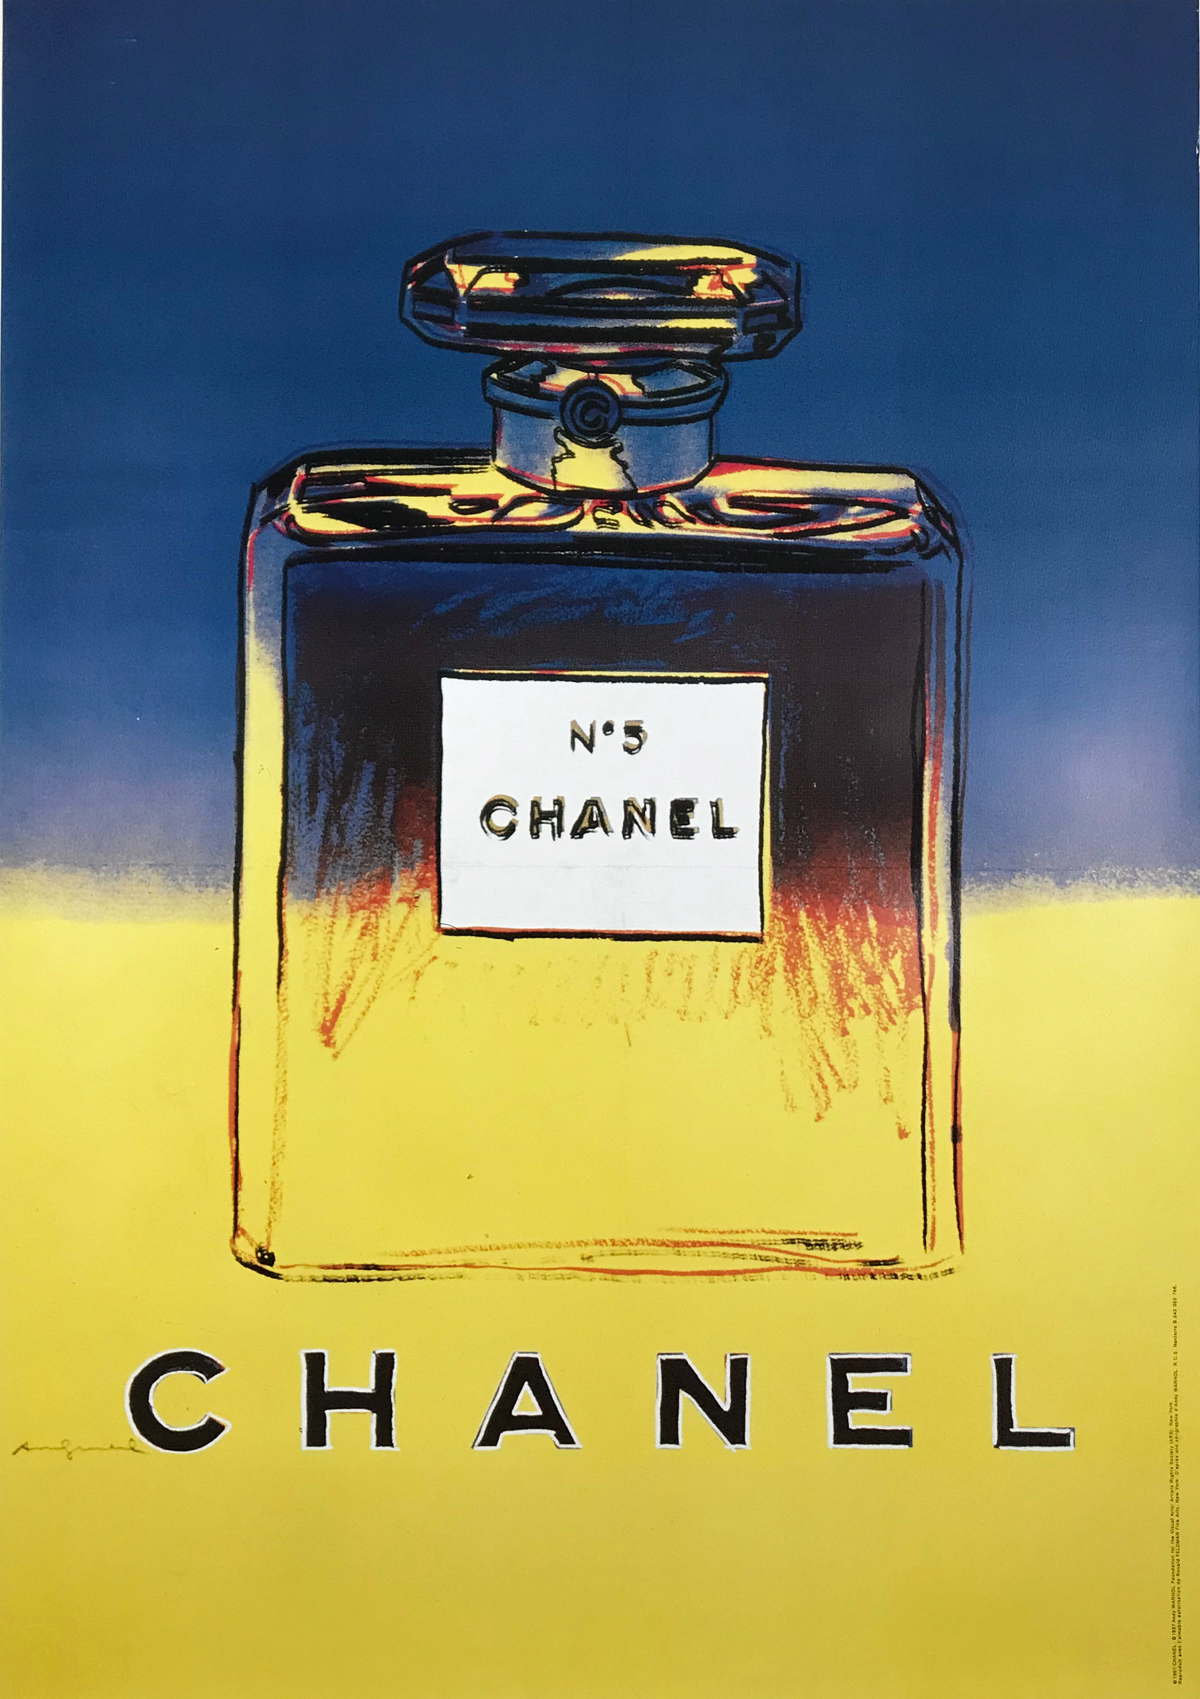 Chanel No5 Poster by the Andy Warhol Foundation Original 1997 ...